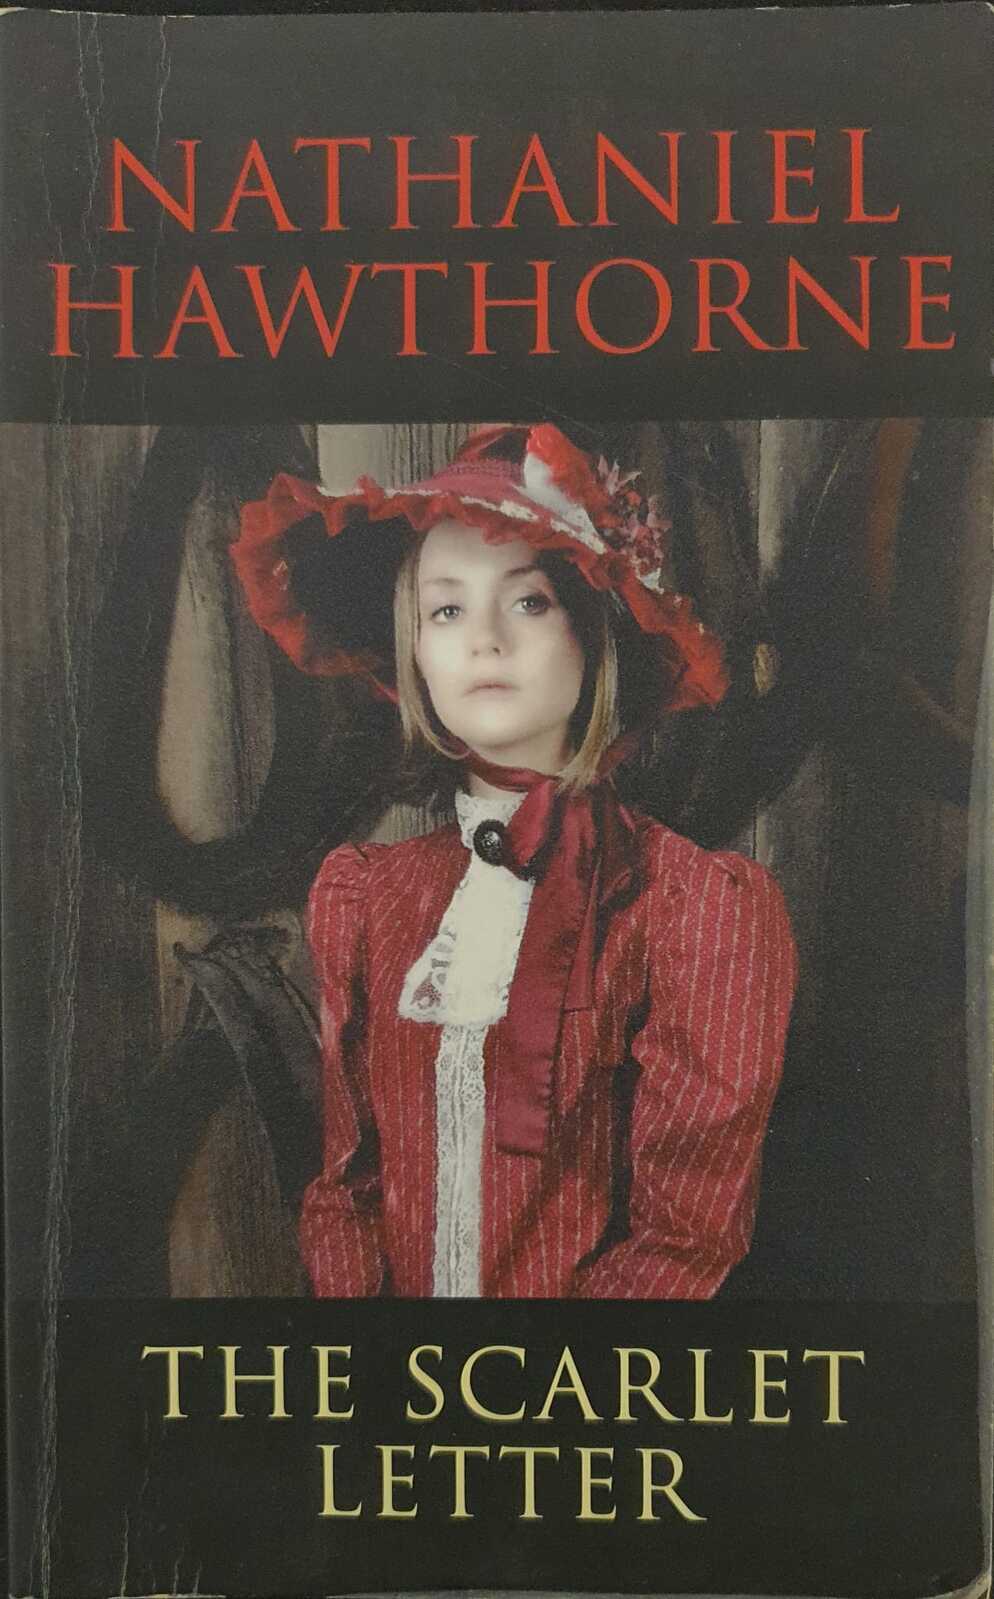 which book did hawthorne prefer to the scarlet letter